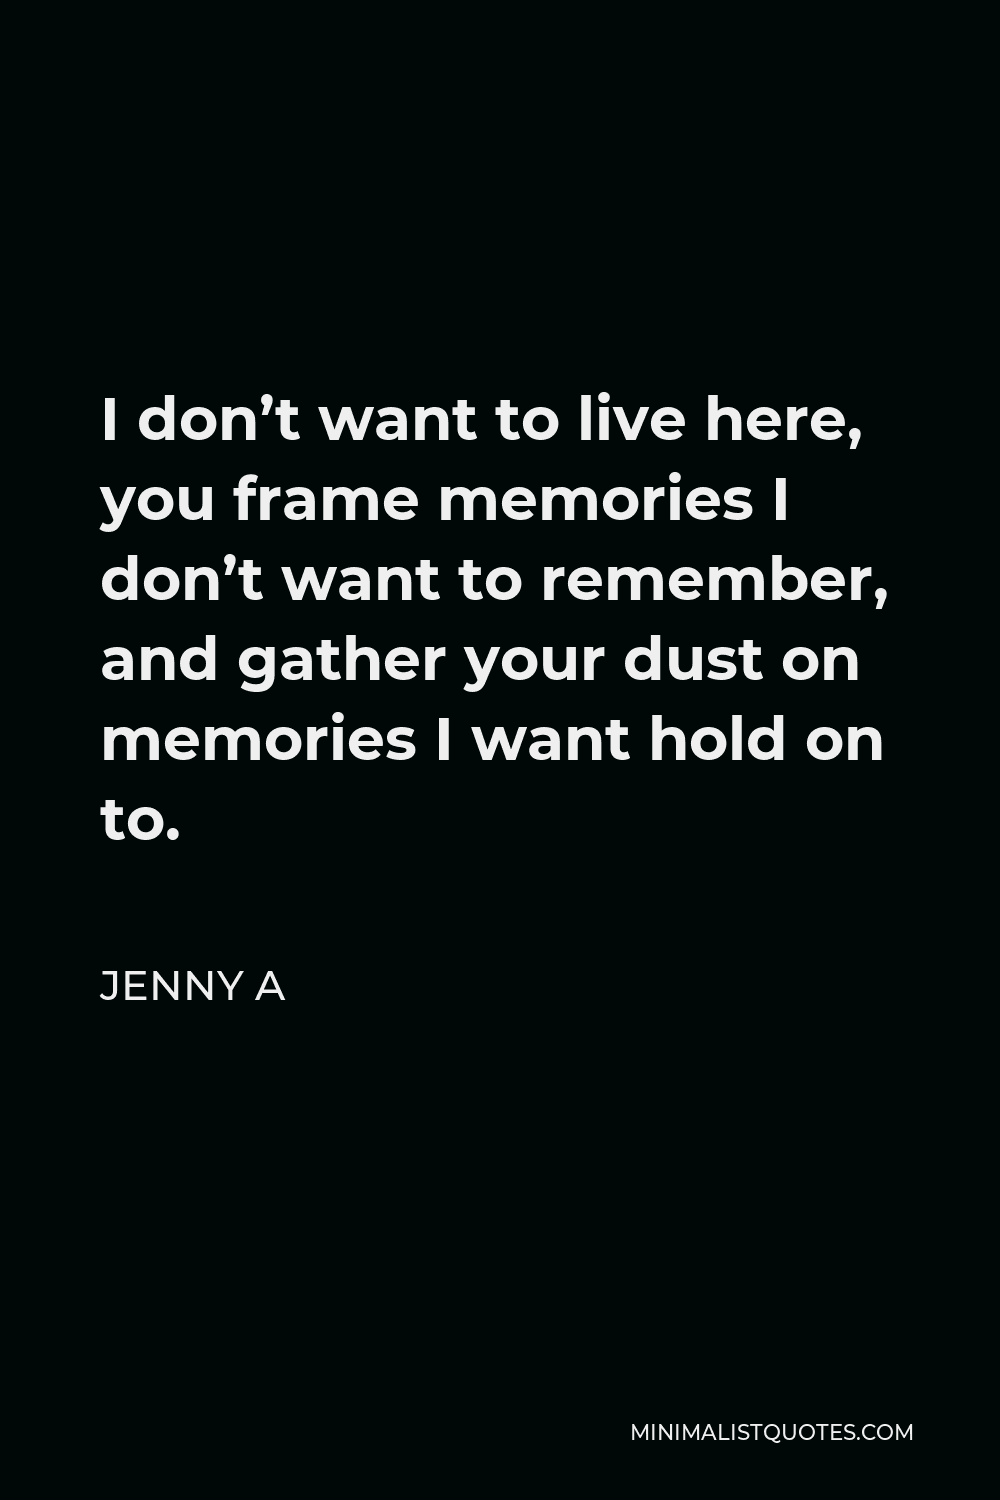 Jenny A Quote - I don’t want to live here, you frame memories I don’t want to remember, and gather your dust on memories I want hold on to.